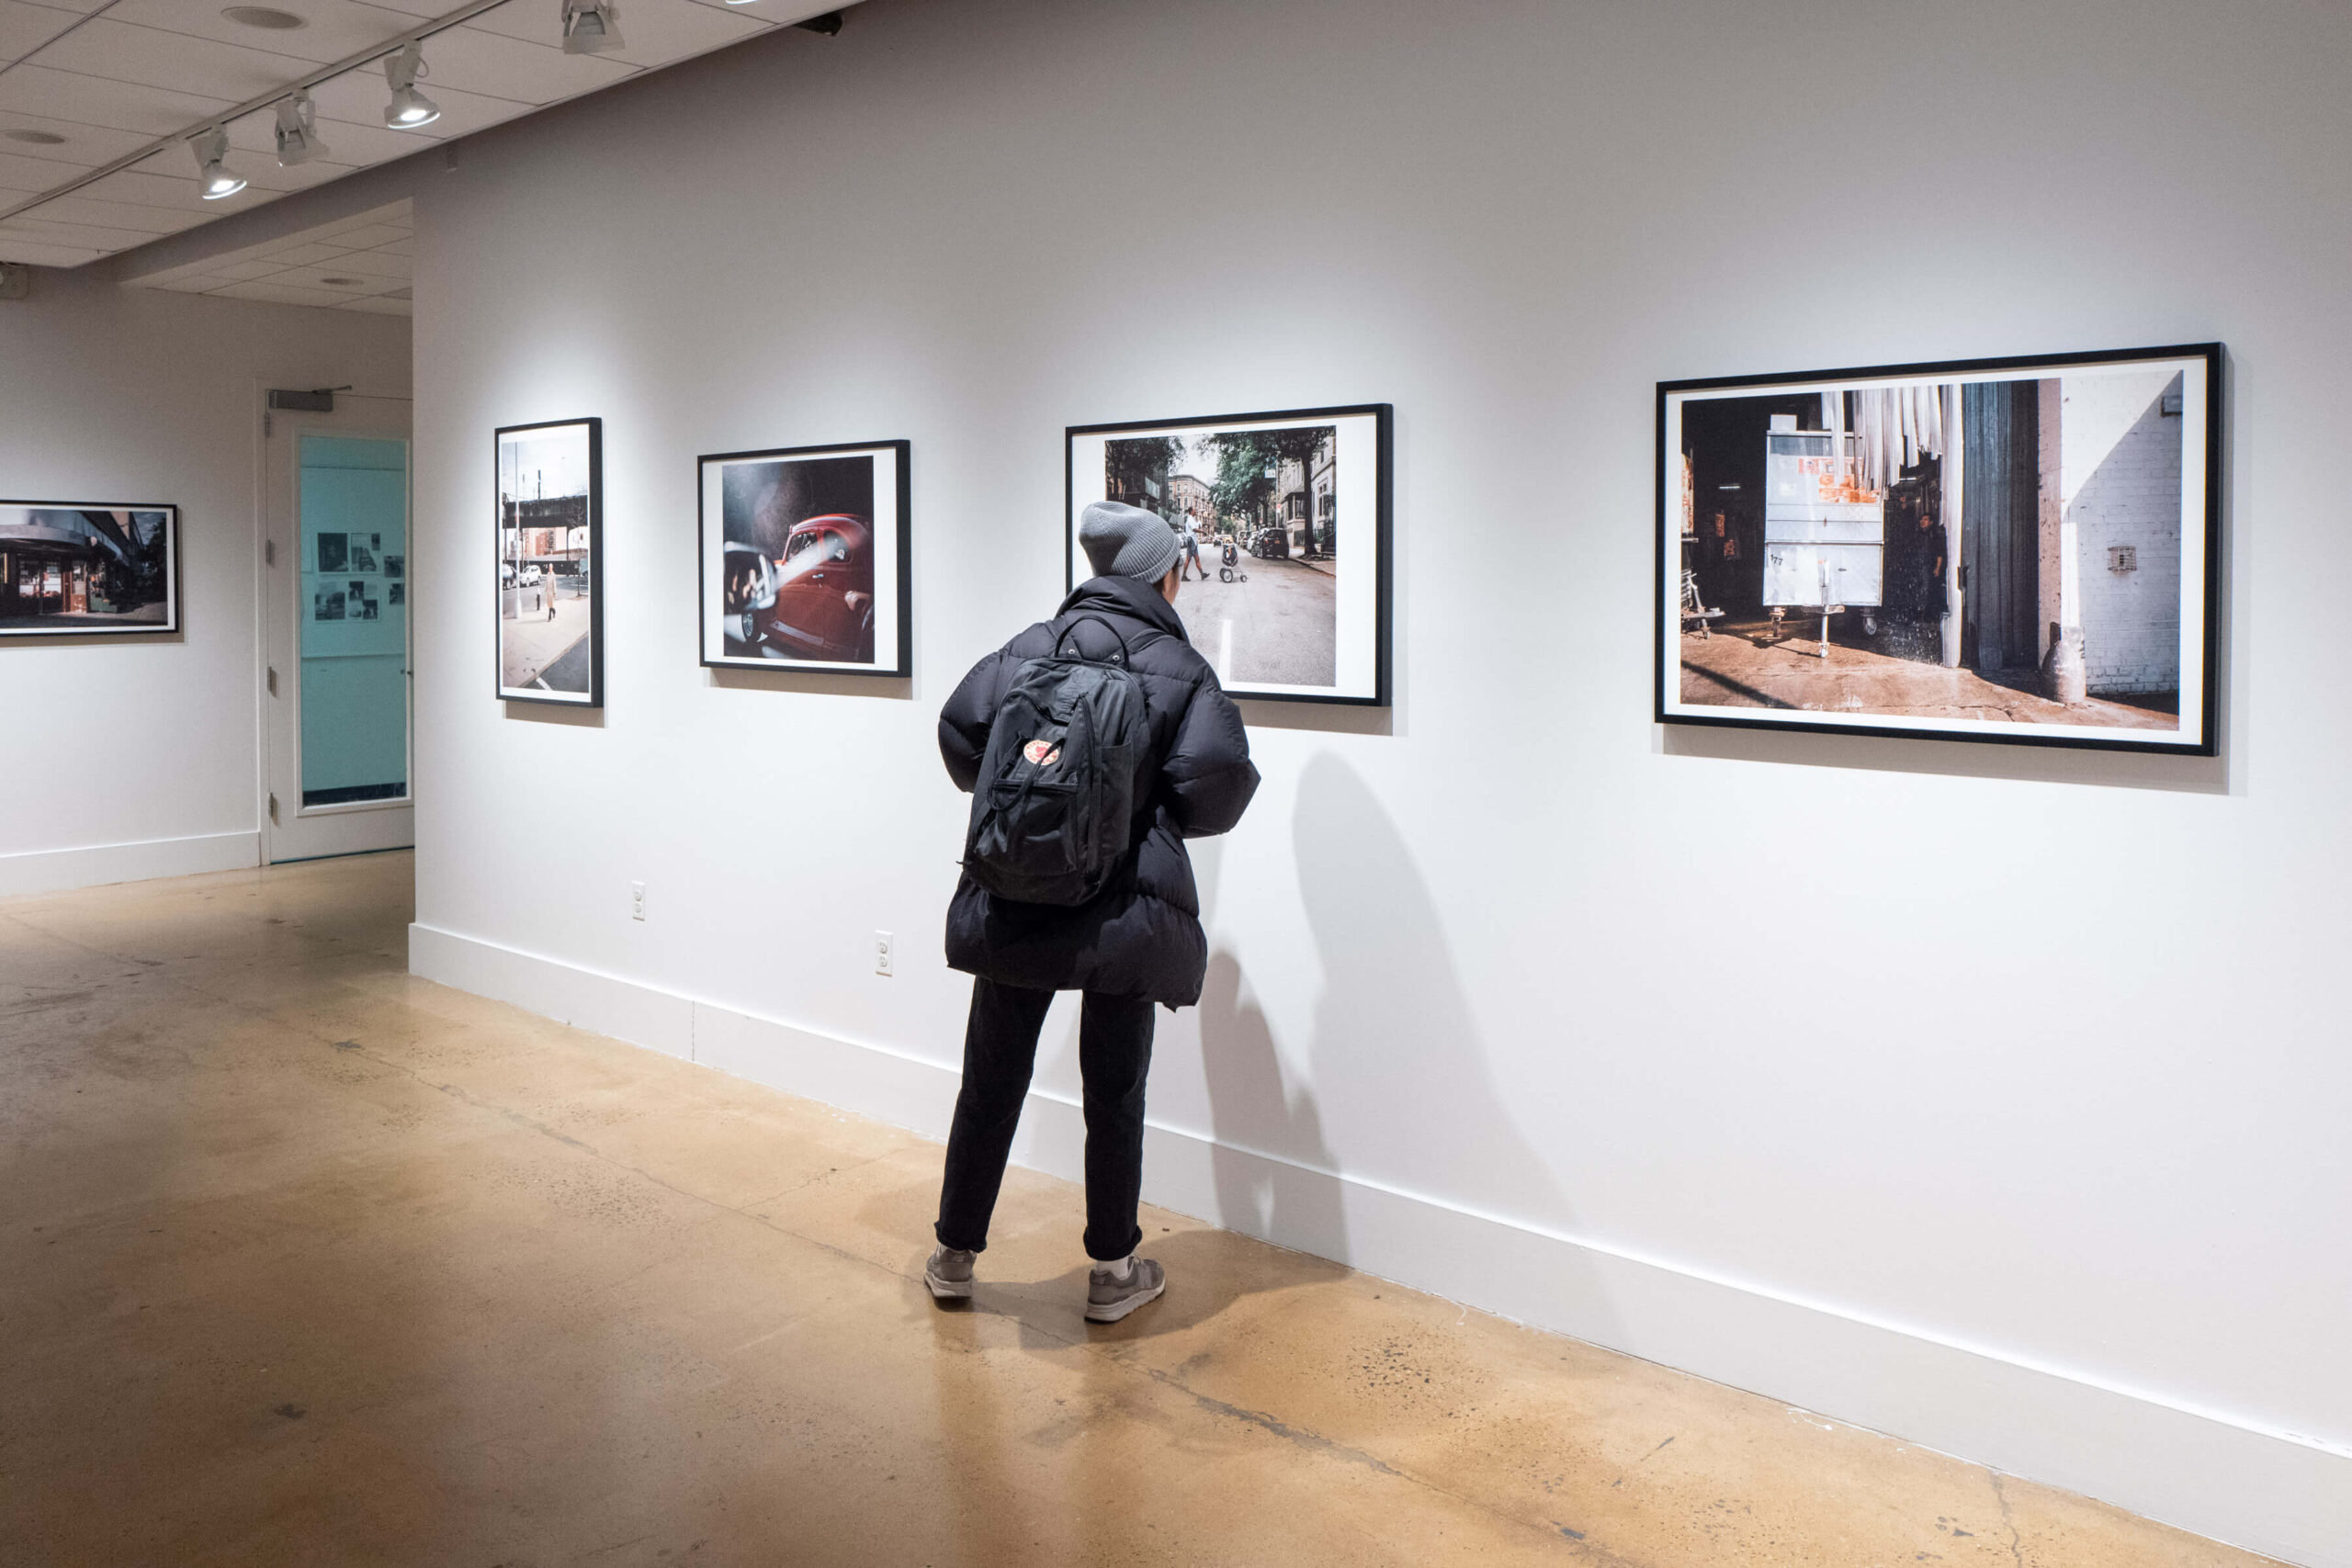 A person looks closely at a photograph in gallery with photos hung on white walls.